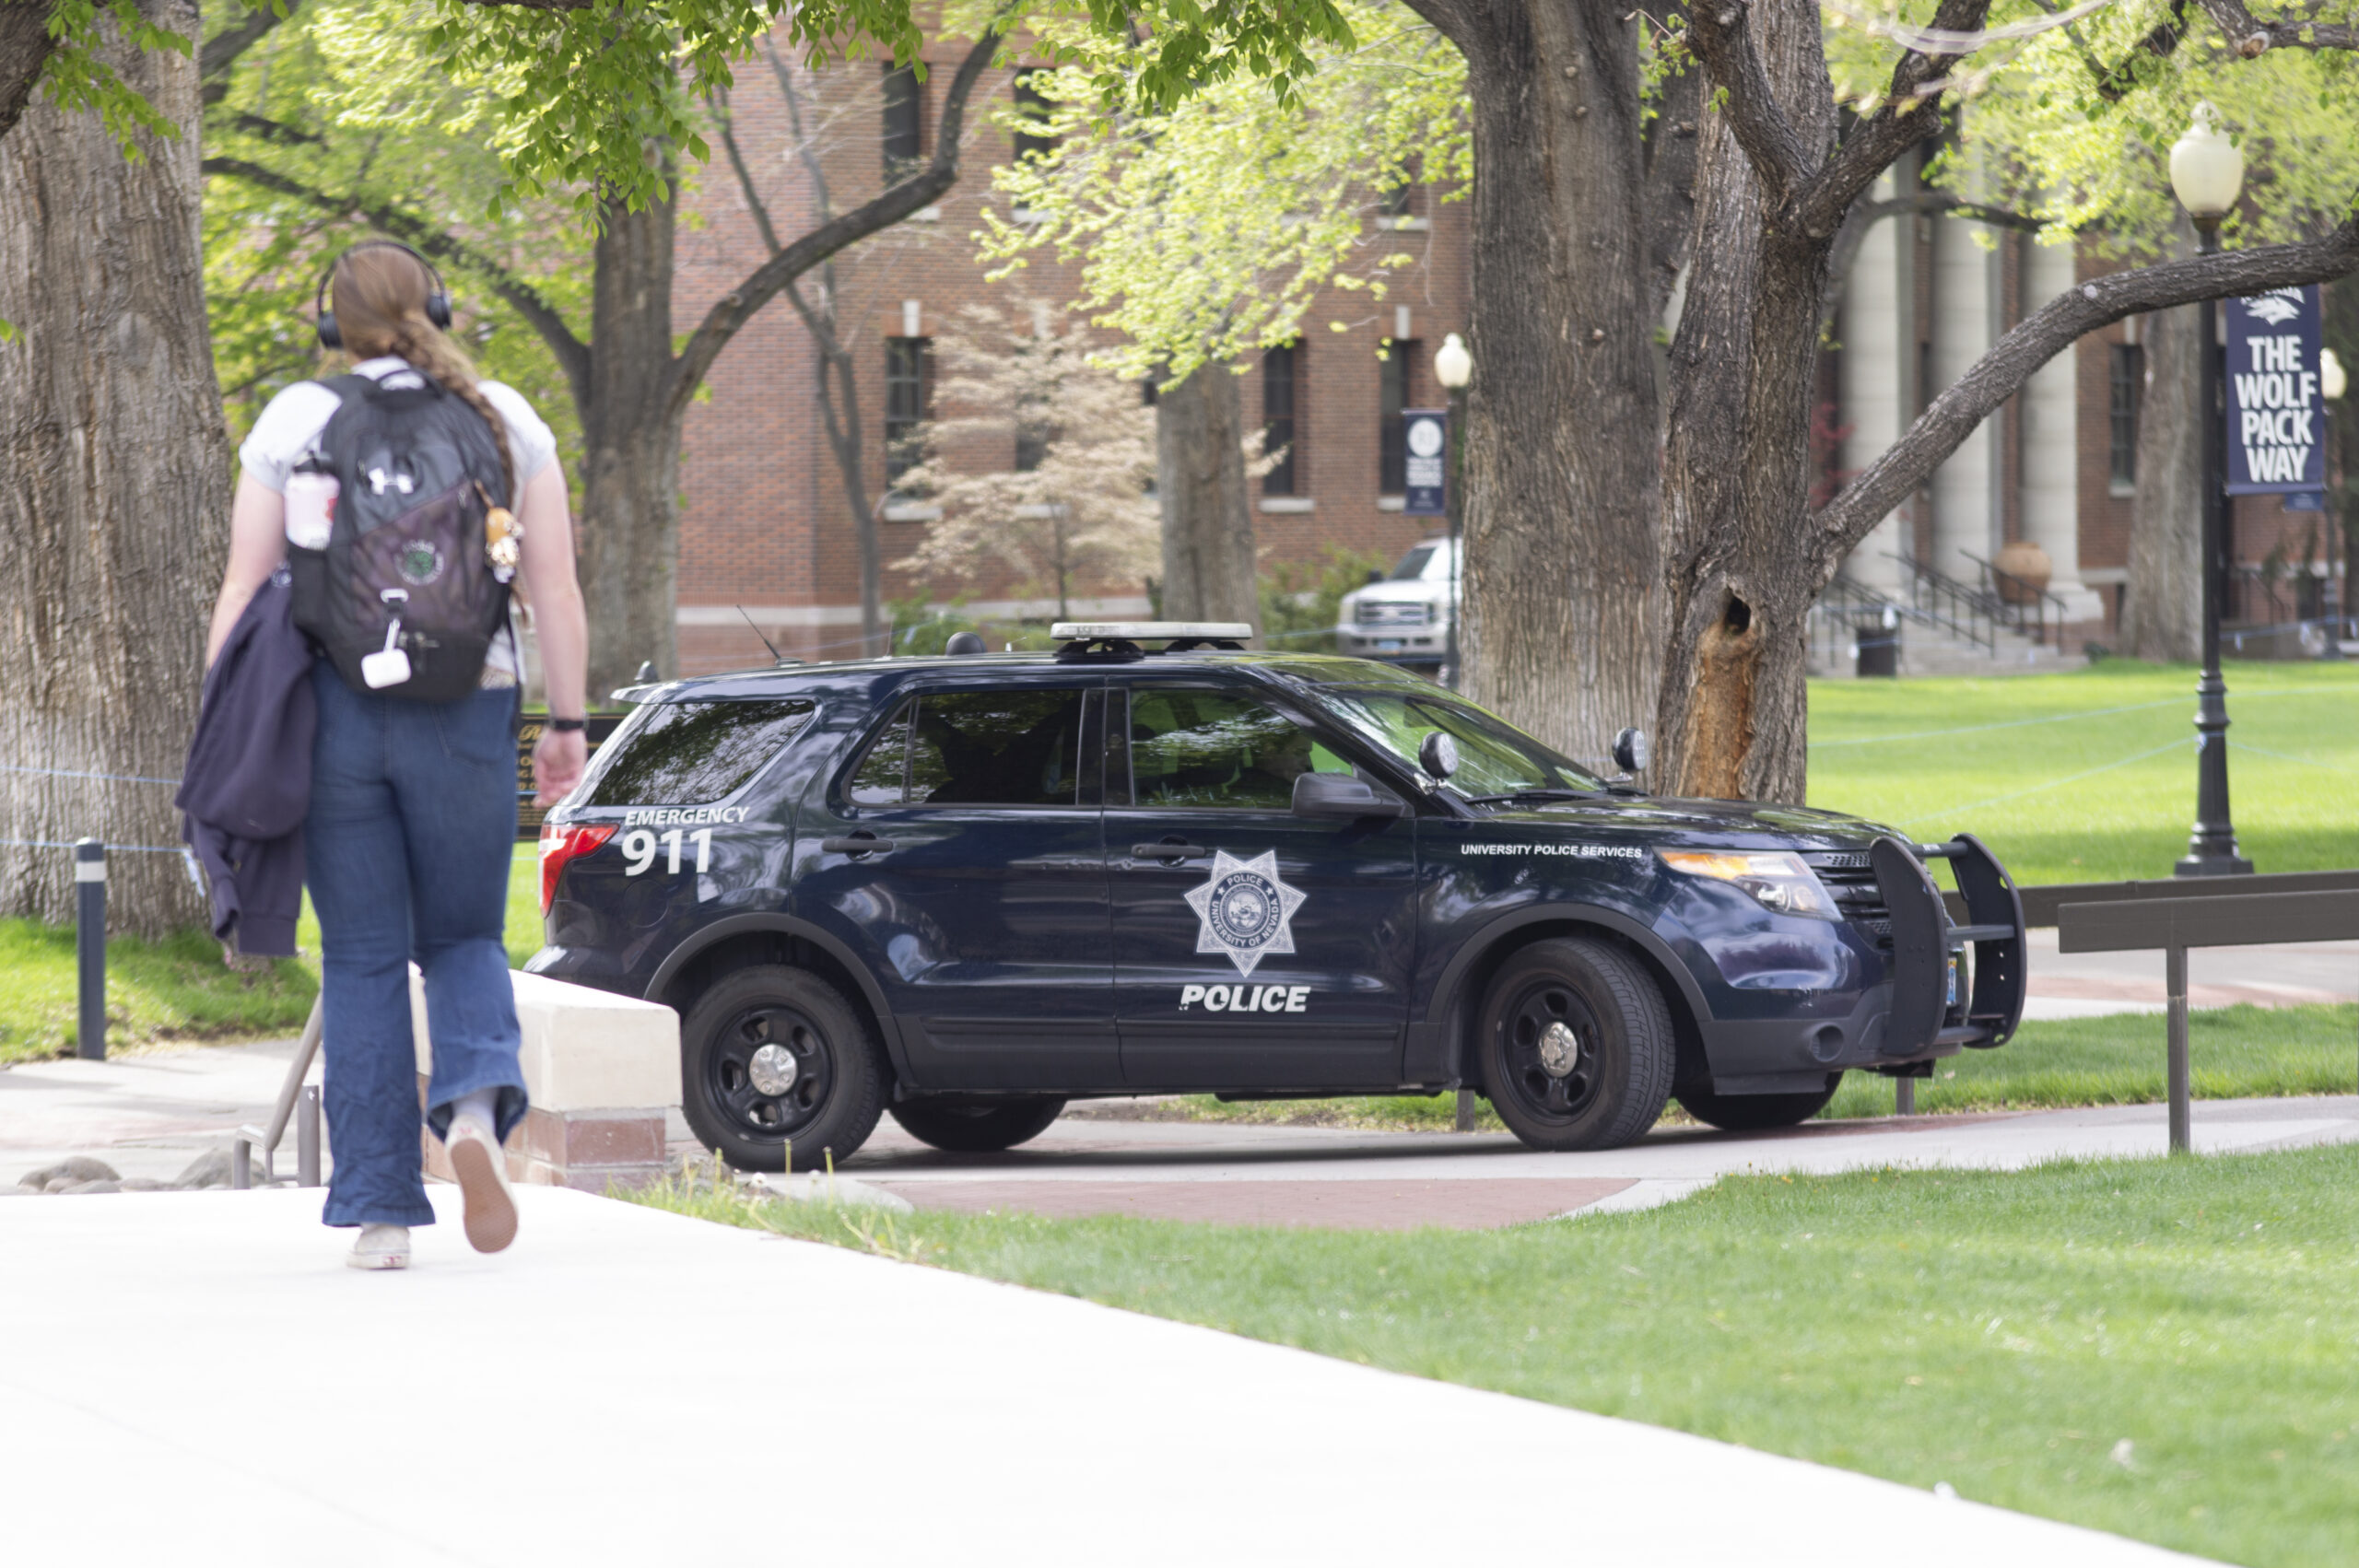 BREAKING: Body discovered on UNR campus